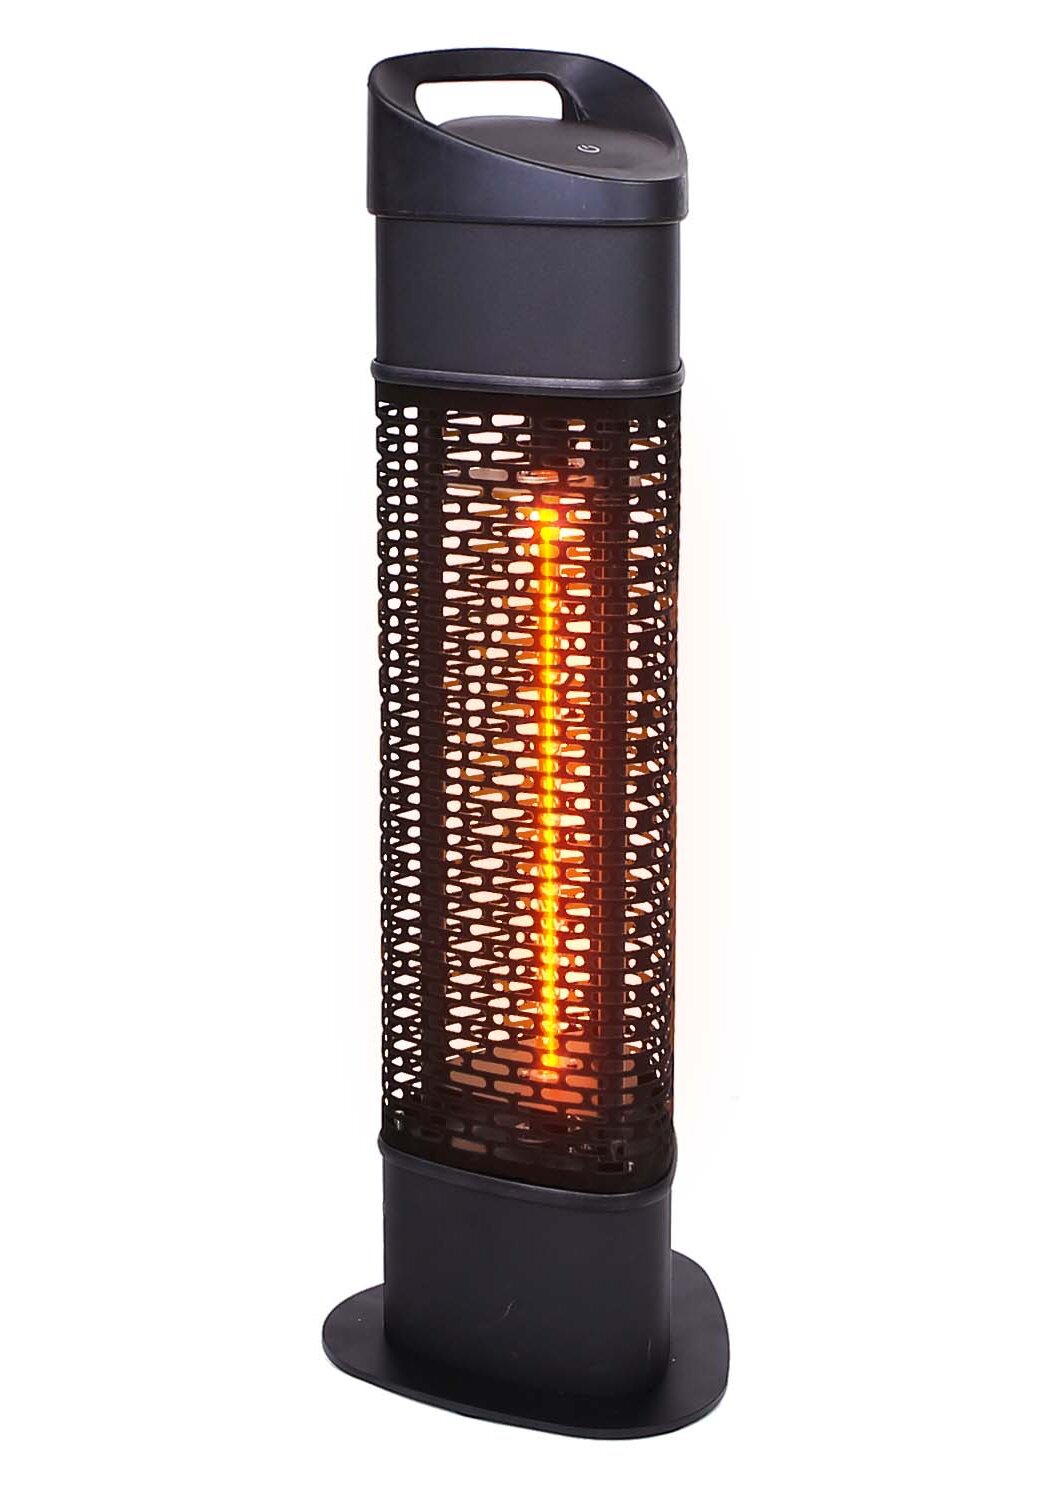 Star Patio Electric Patio Heater Electric Outdoor Heater Portable Heater with Hammered Bronze Finished 1500W Tabletop Heater Infrared Heaters Outdoor Space Heater STP1566-BT